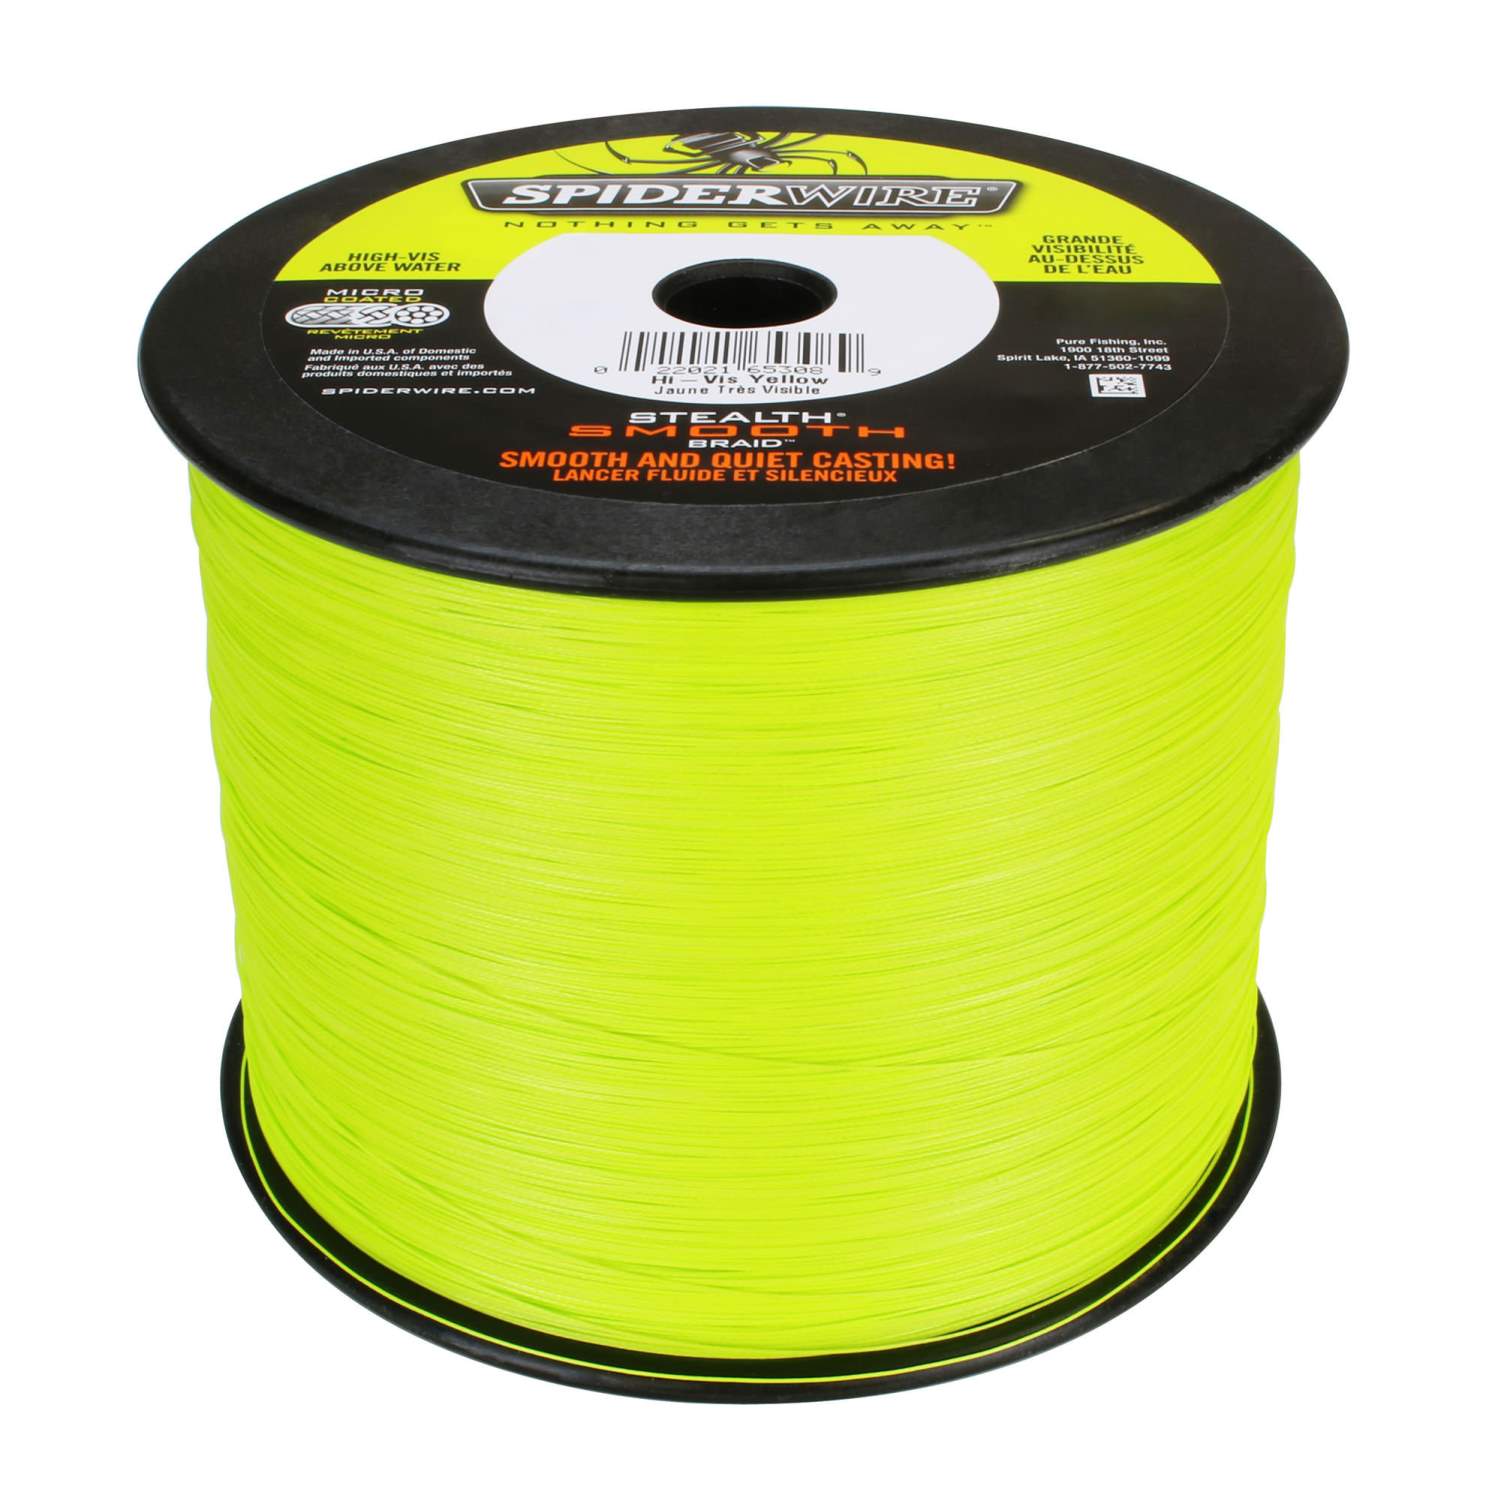 SpiderWire Stealth® Smooth - Pure Fishing